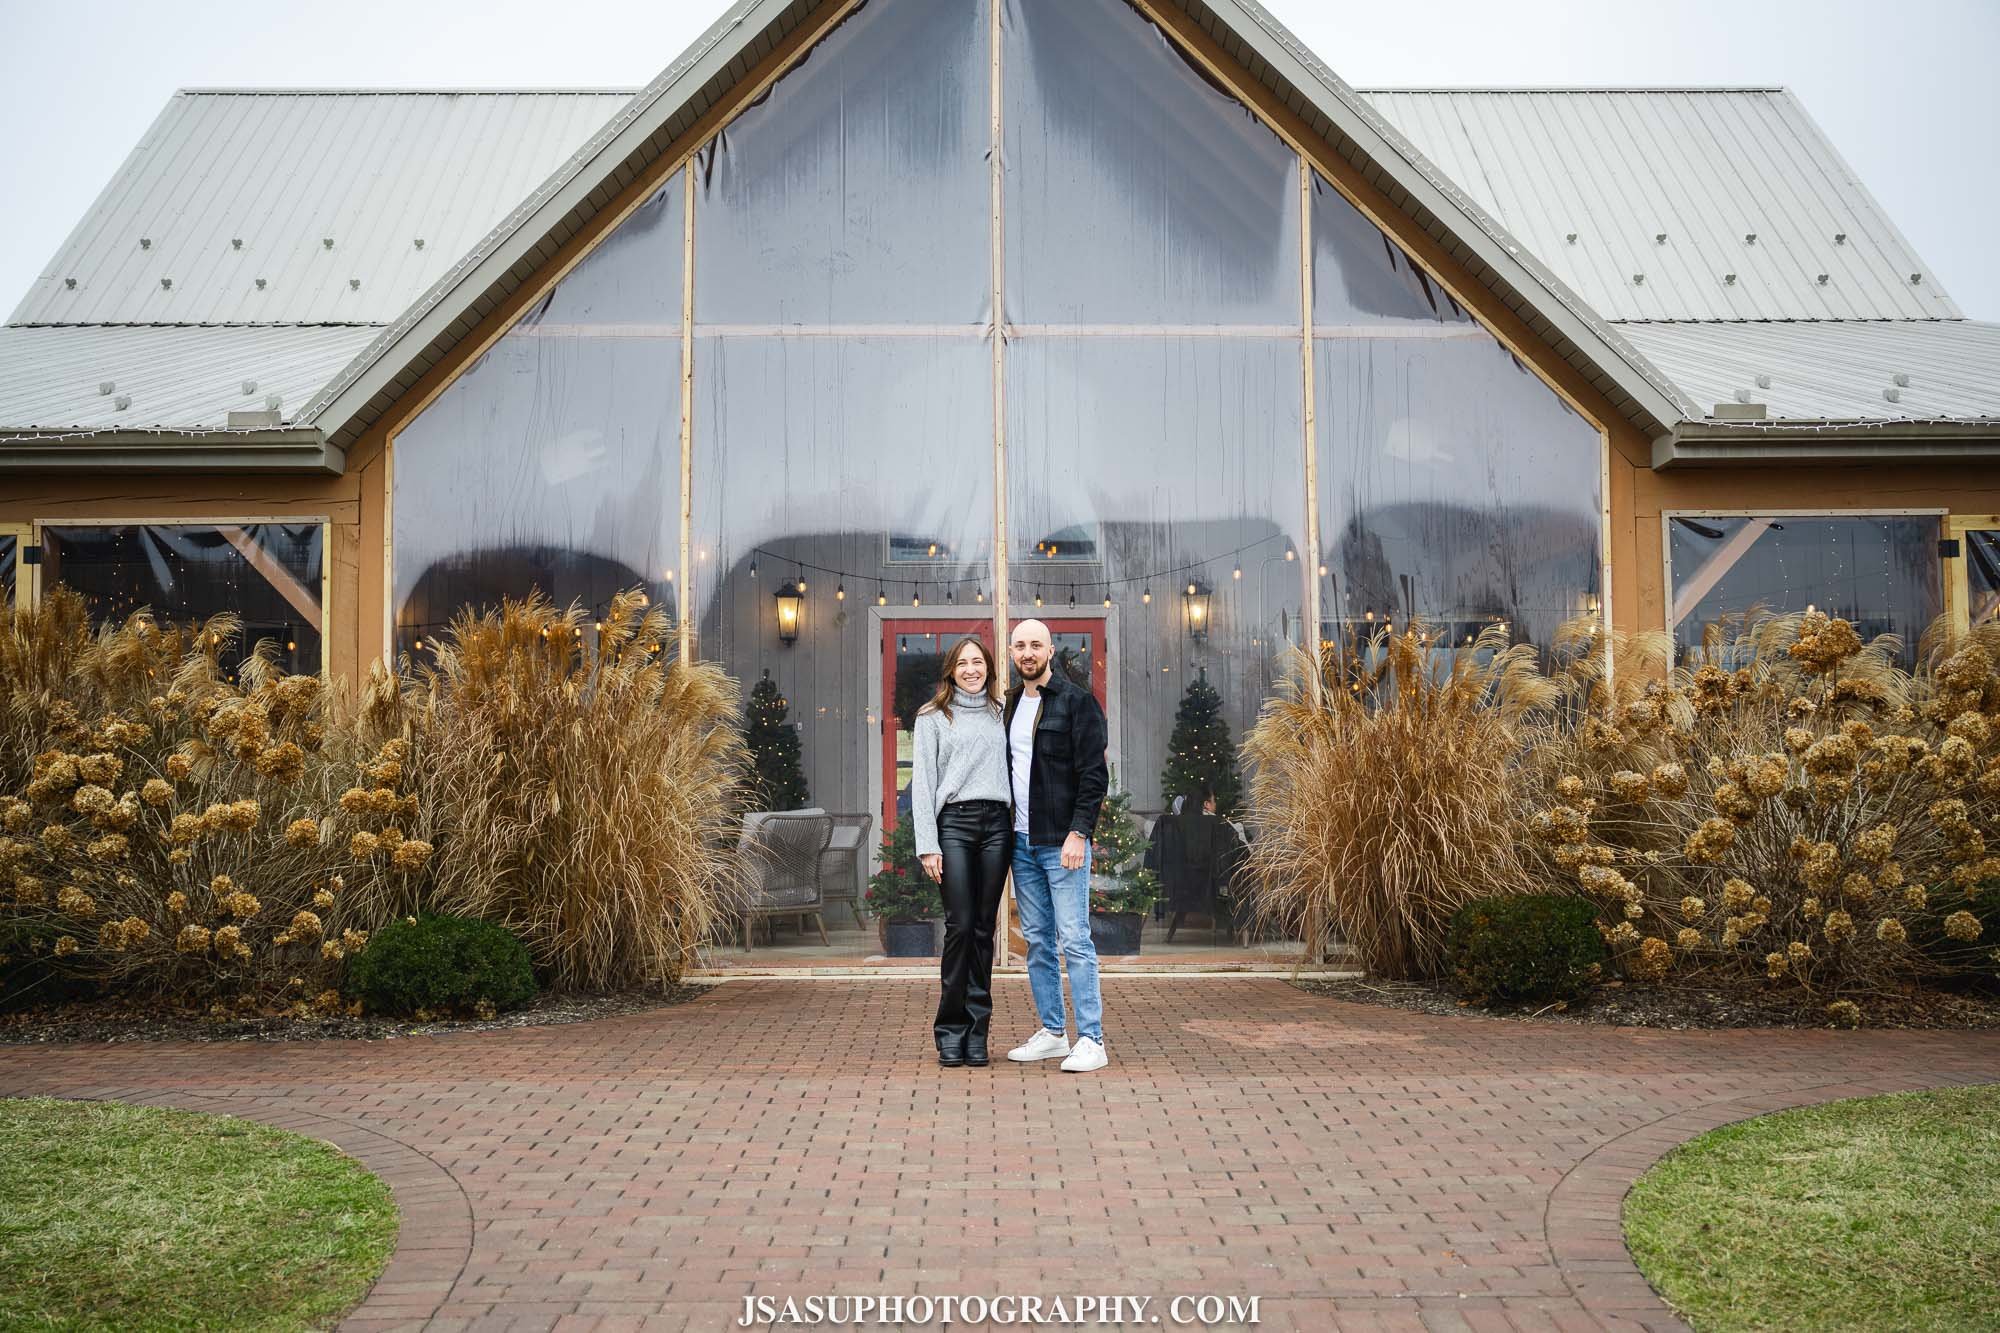 drew-alex-surprise-proposal-photos-old-westminister-winery-jsasuphotography-1.jpg